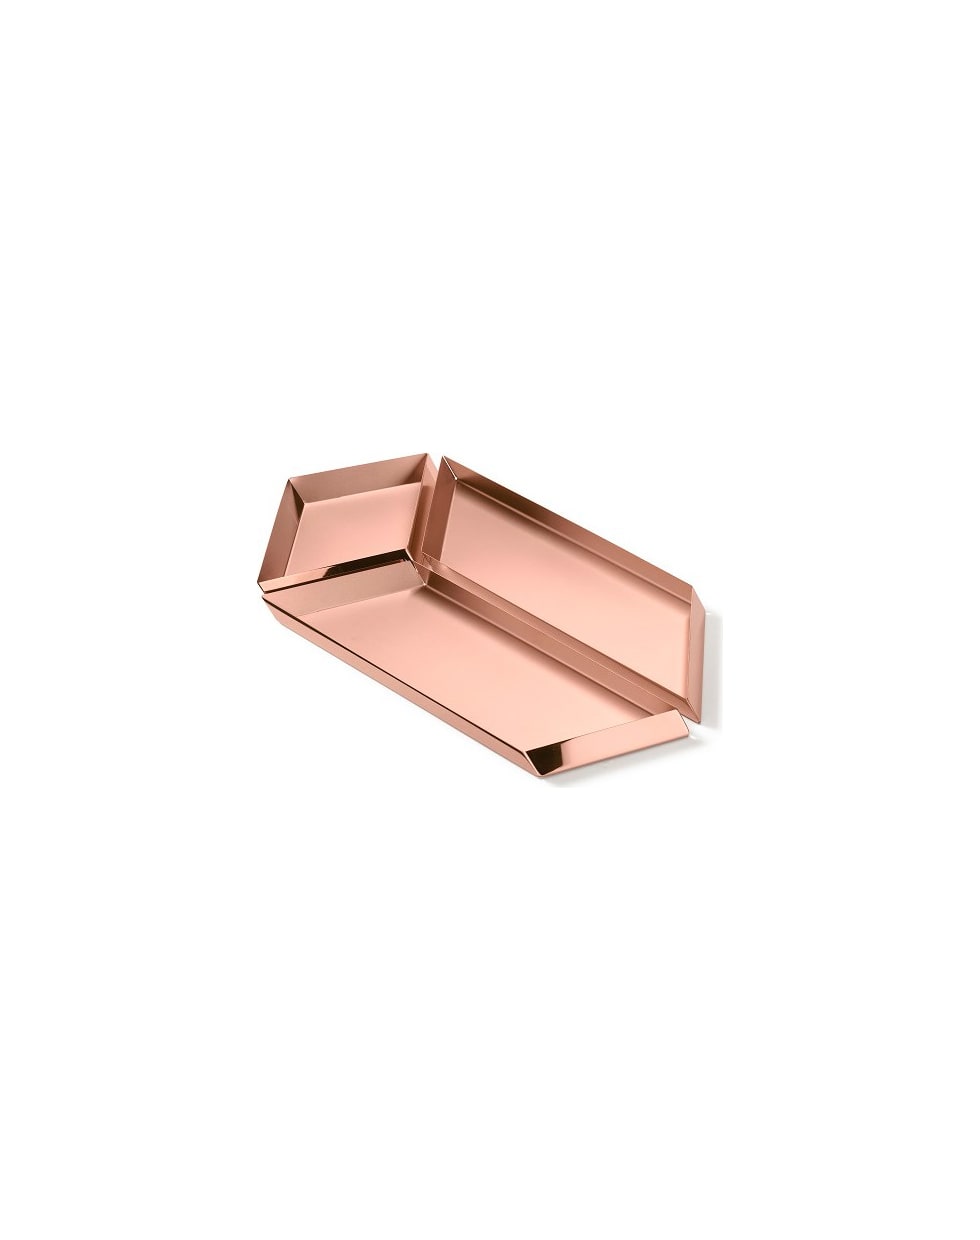 Ghidini 1961 Axonometry - Large Parallelepiped Rose Gold - Rose gold